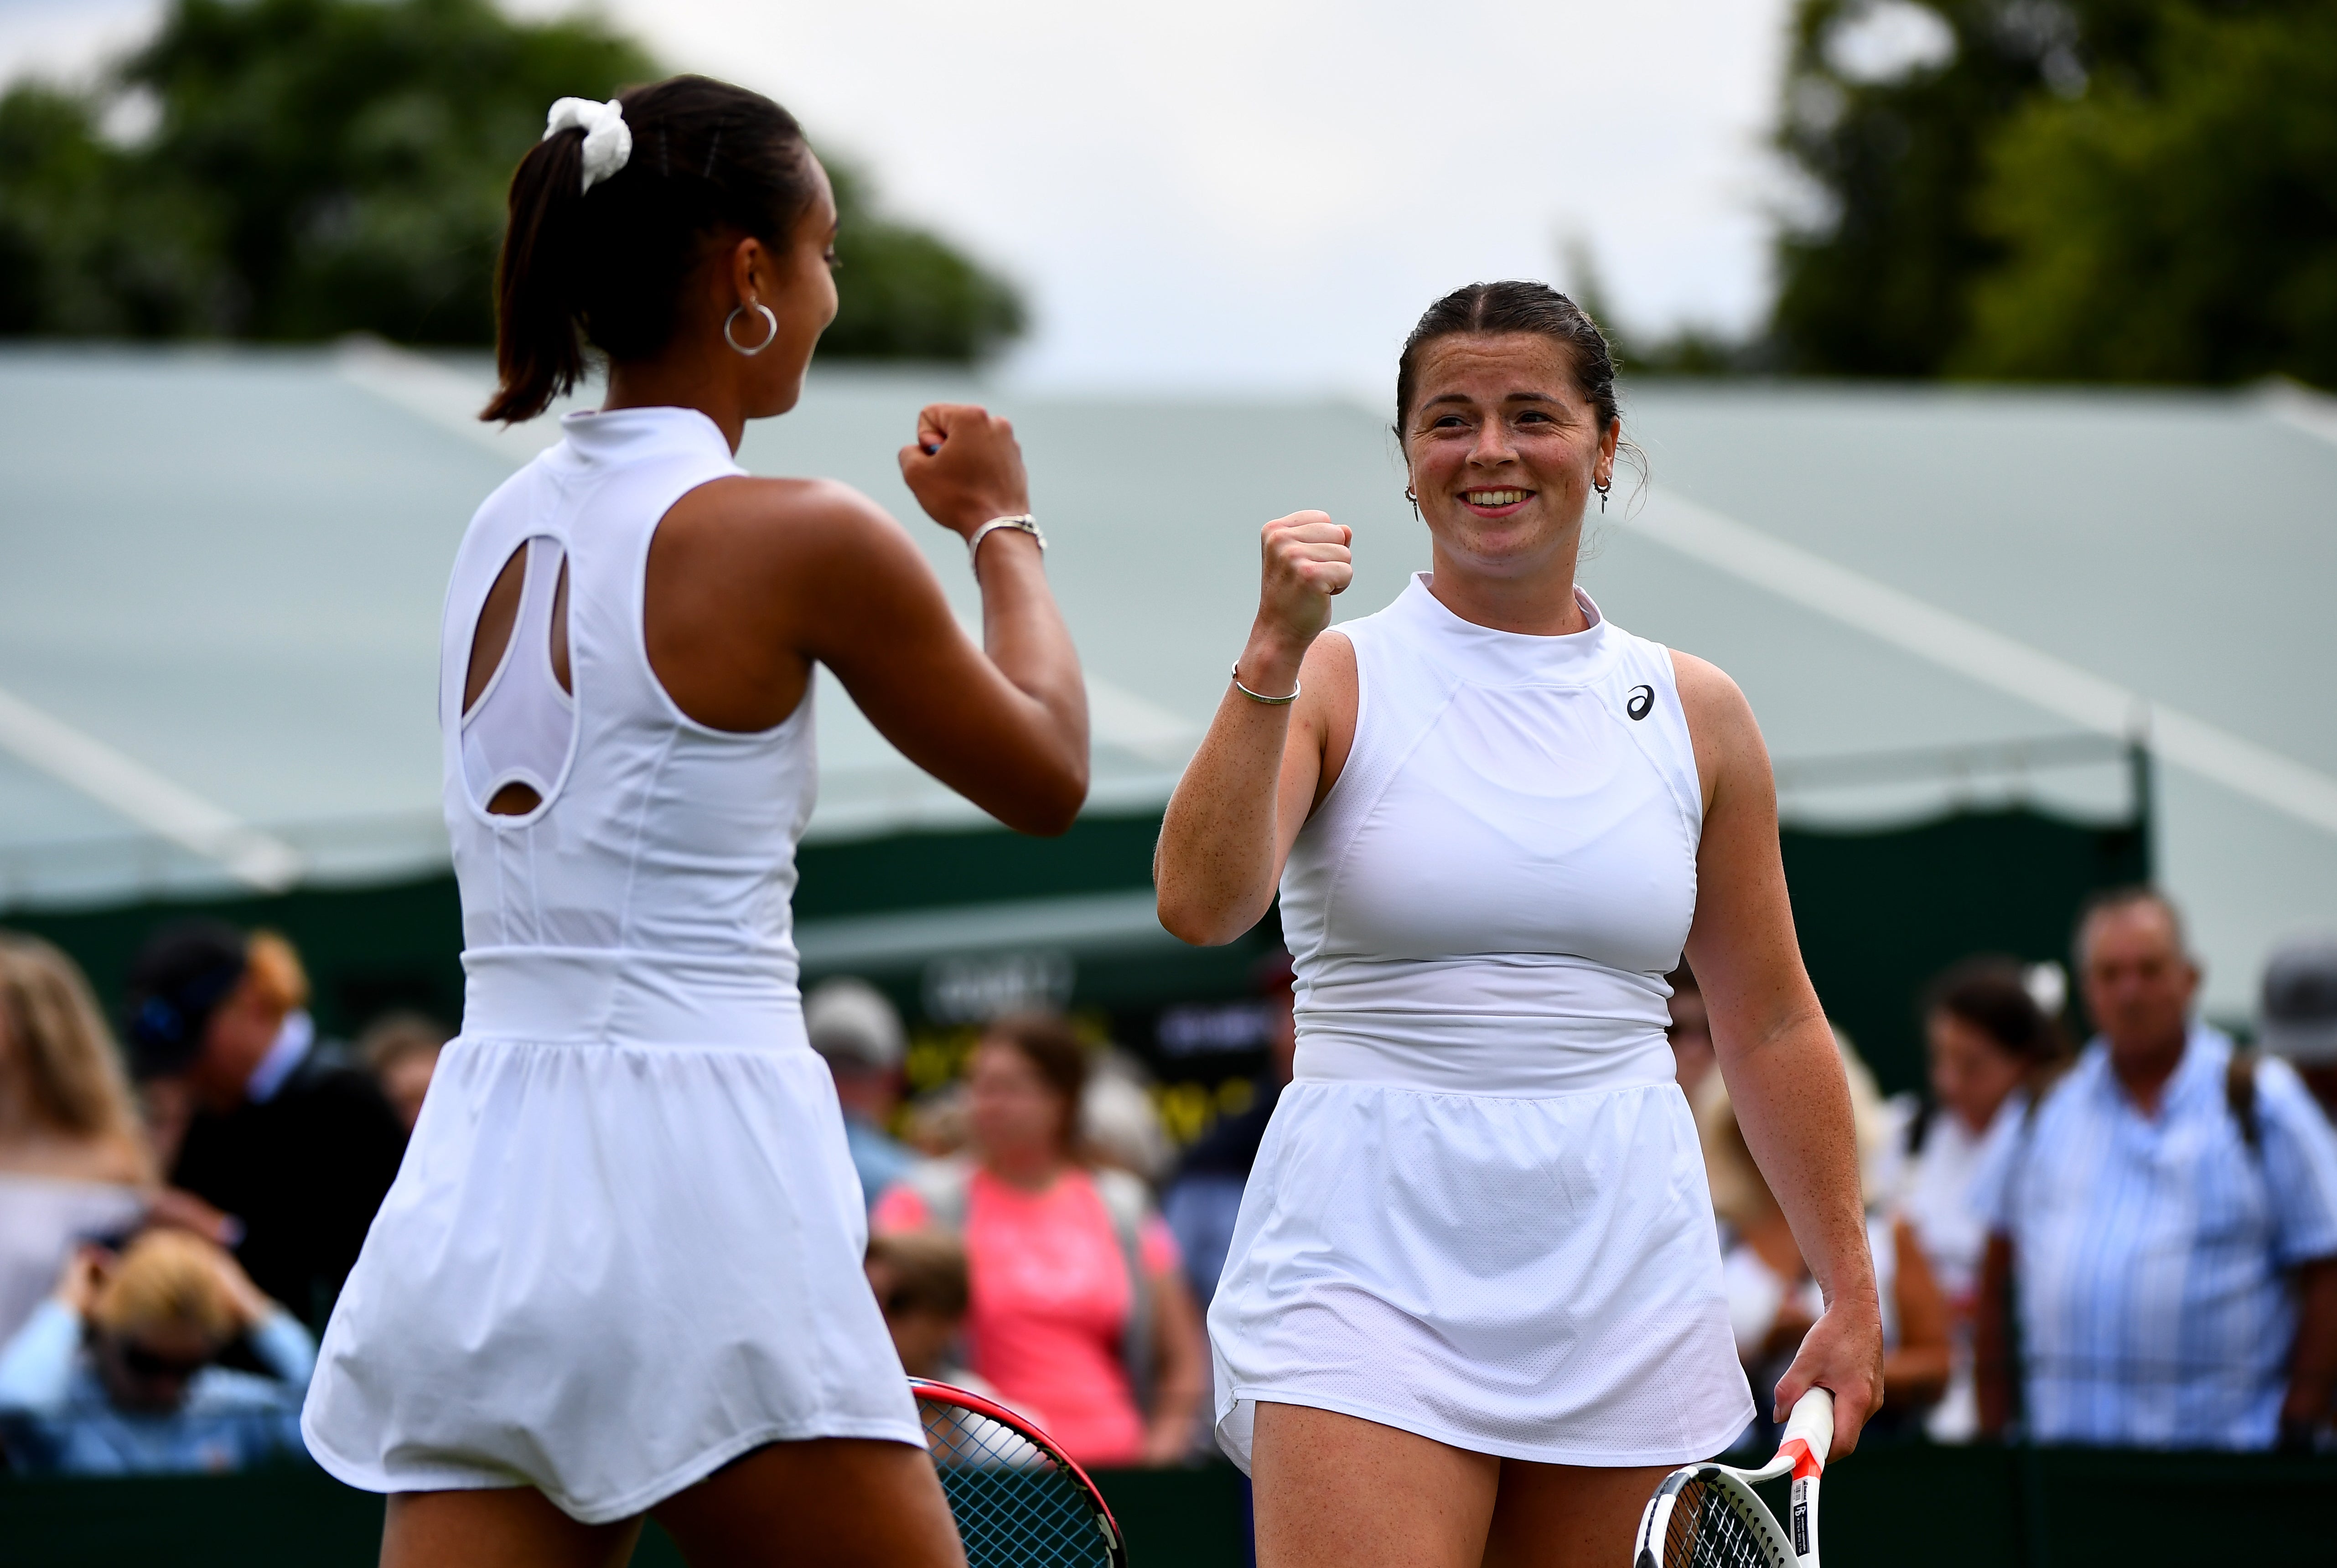 Sarah Beth Grey, right, and Eden Silva during the women’s doubles in Wimbledon 2019 (Victoria Jones/PA)